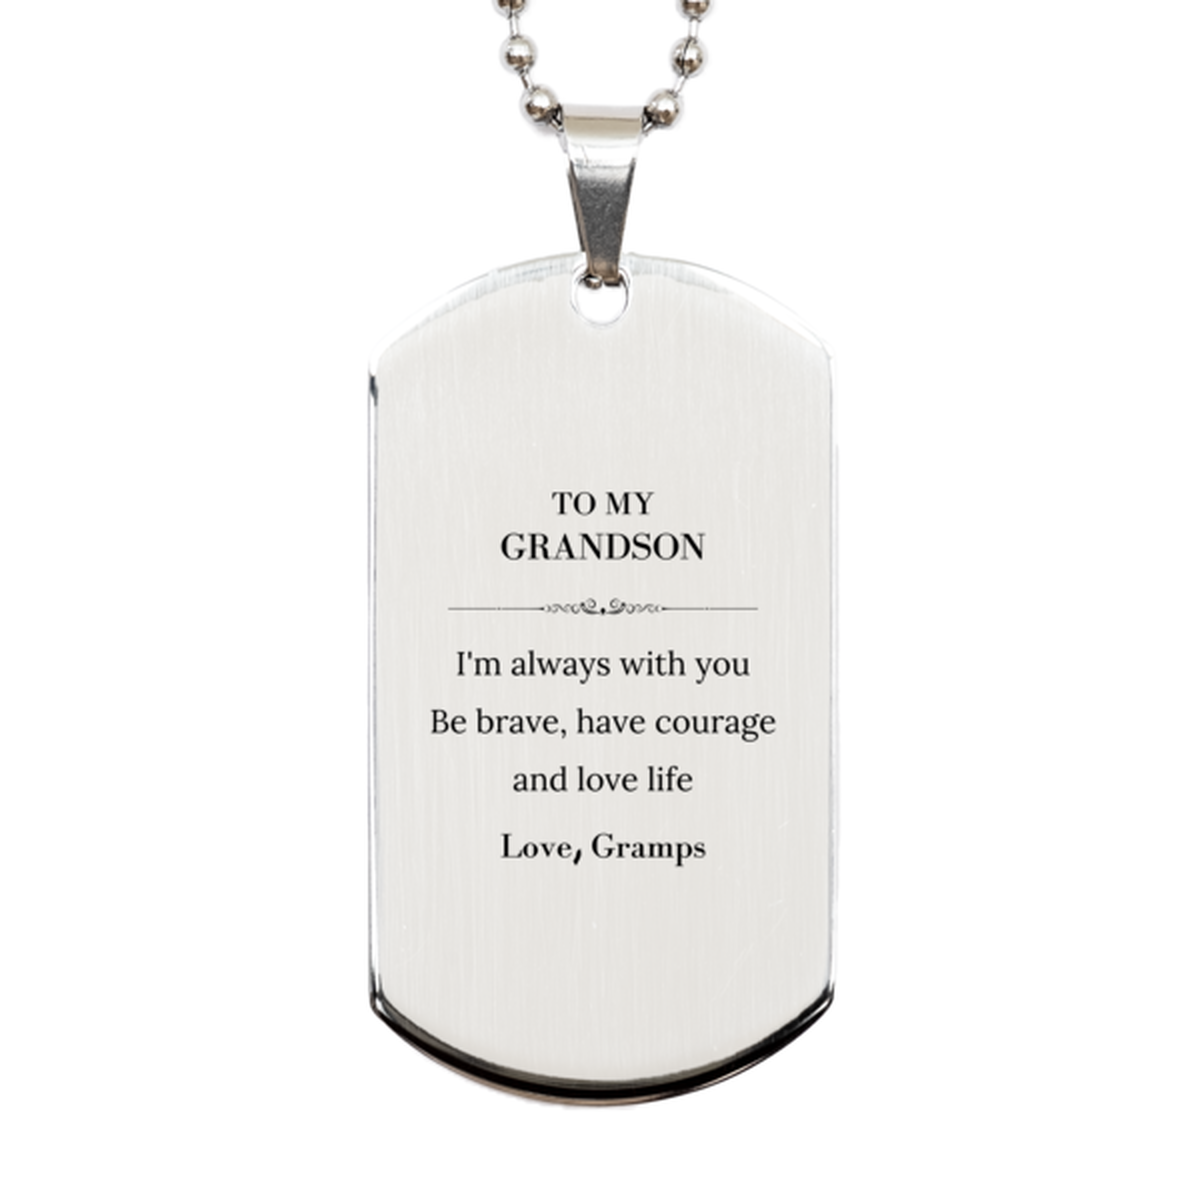 To My Grandson Gifts from Gramps, Unique Silver Dog Tag Inspirational Christmas Birthday Graduation Gifts for Grandson I'm always with you. Be brave, have courage and love life. Love, Gramps